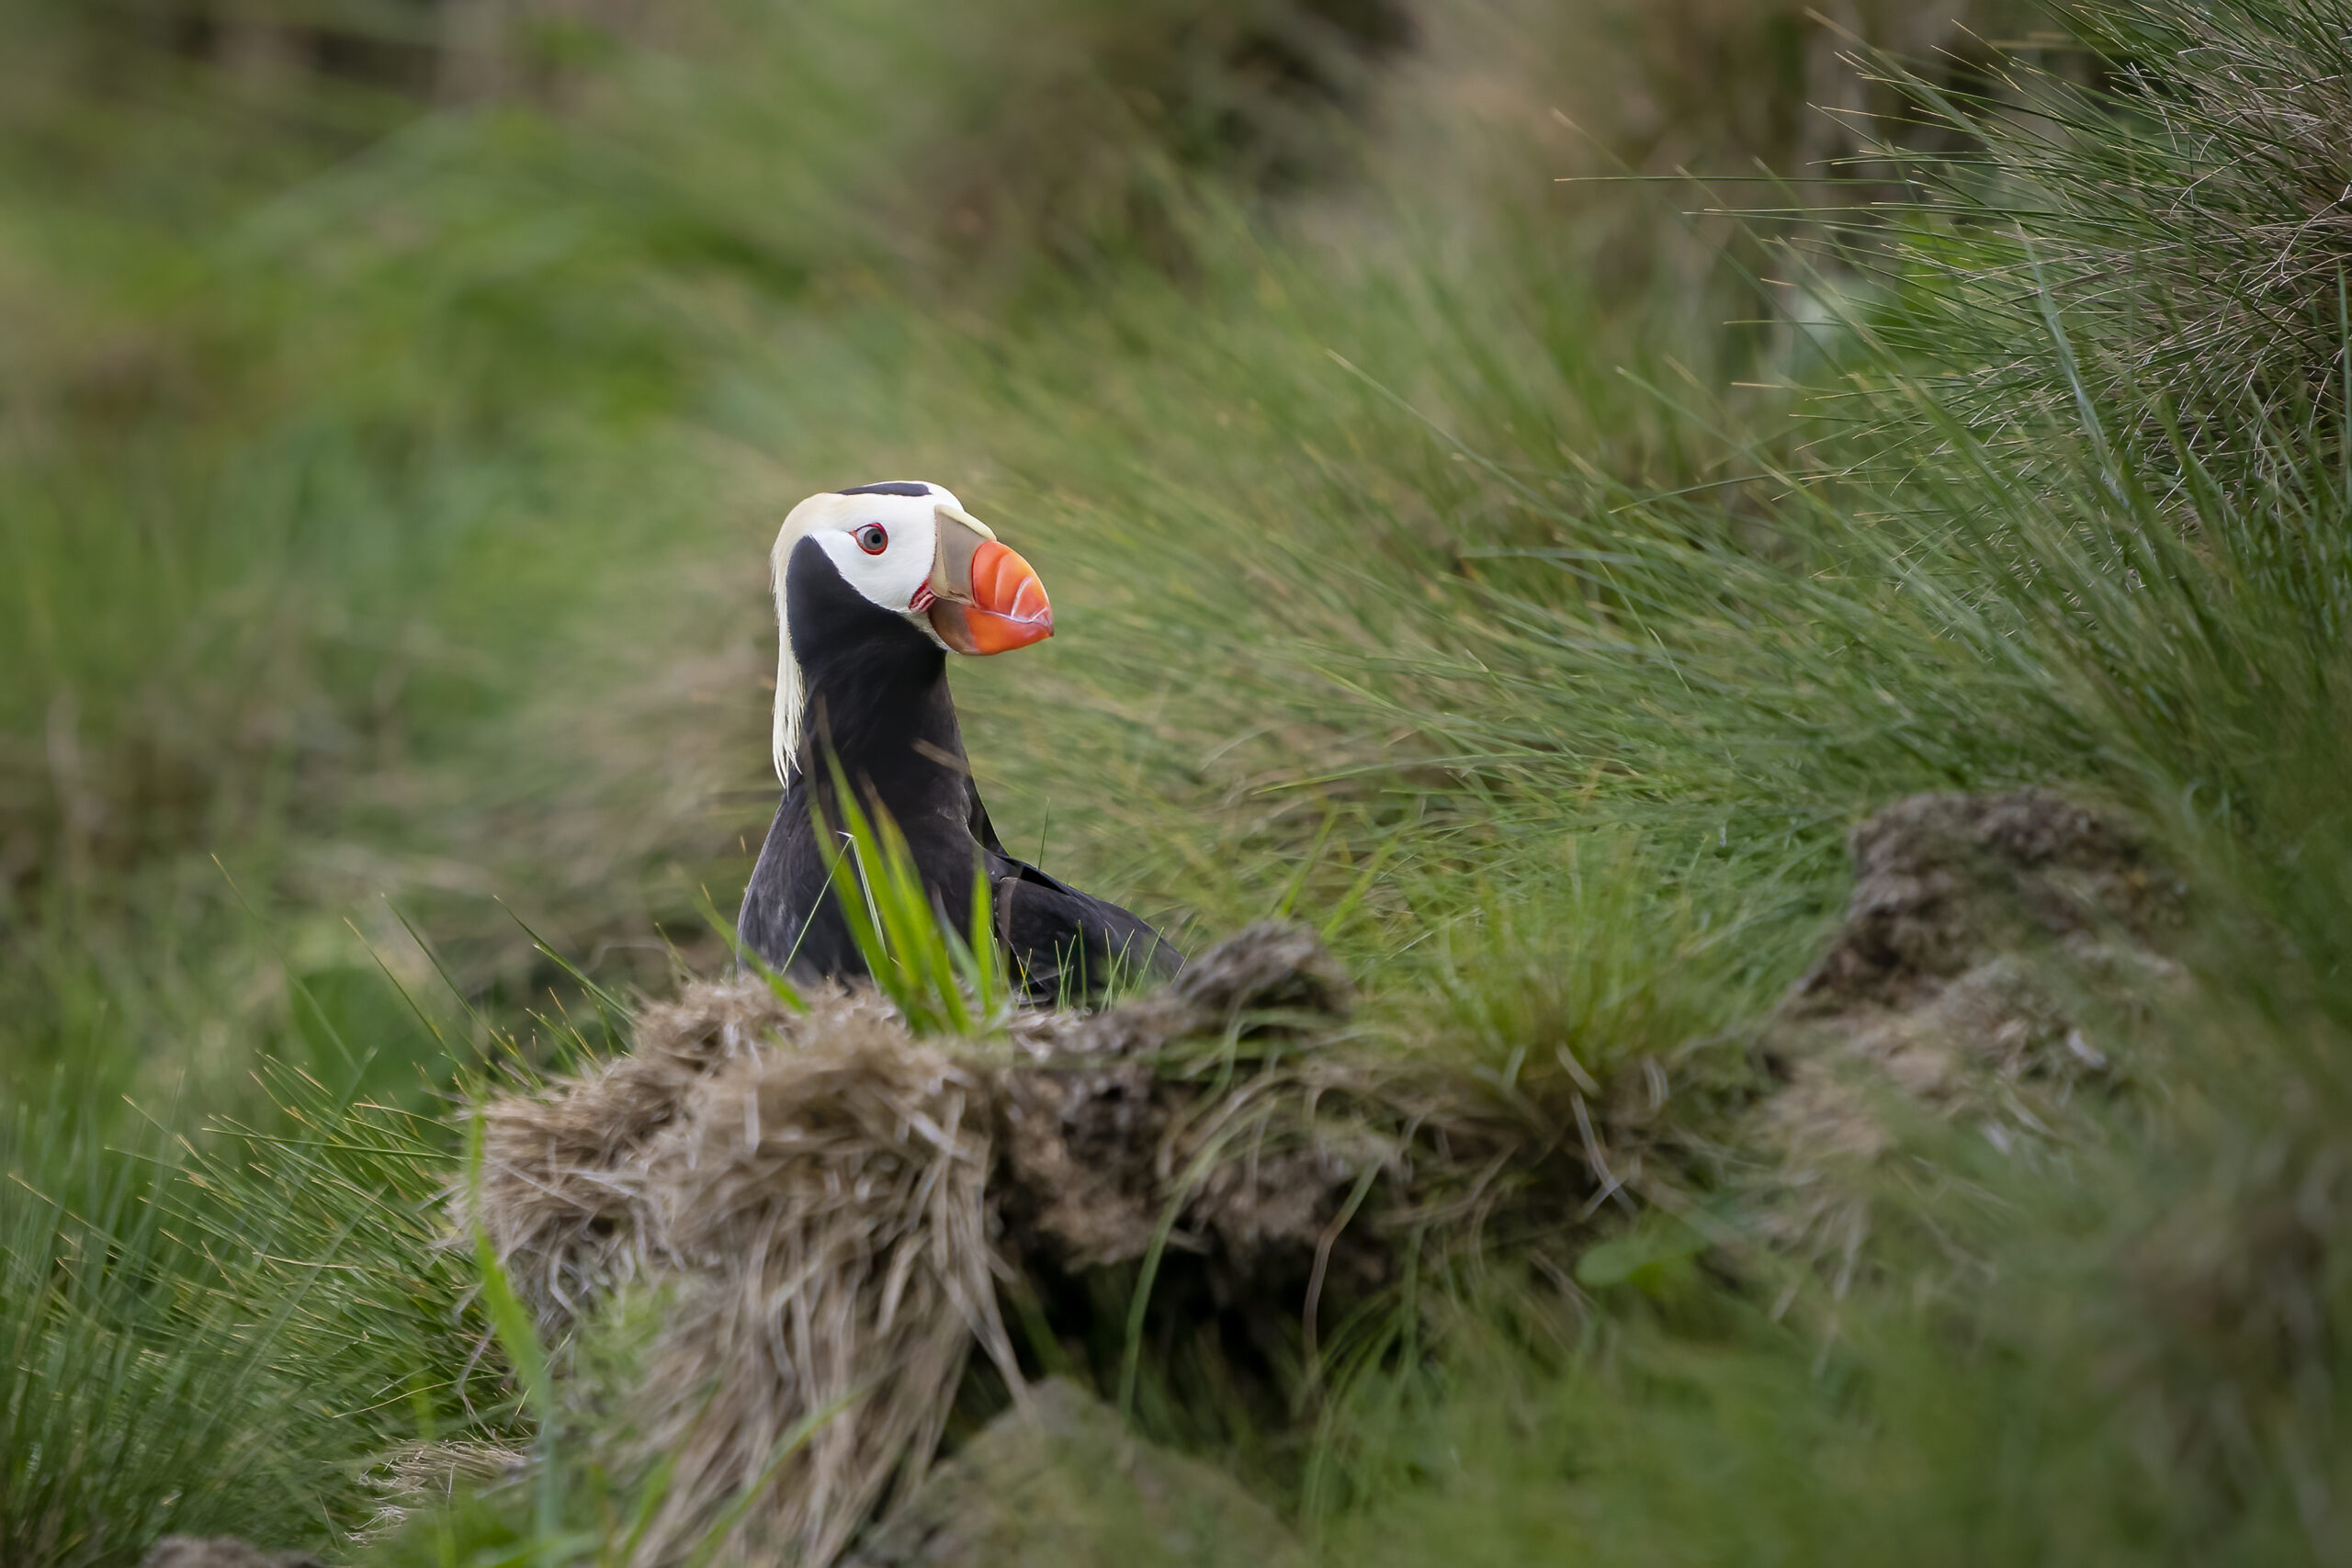 a tufted puffin, with an orange beak, white markings around its eyes, and feathers that extend down the back of its head like golden hair, sits among grasses on one of the Scott Islands